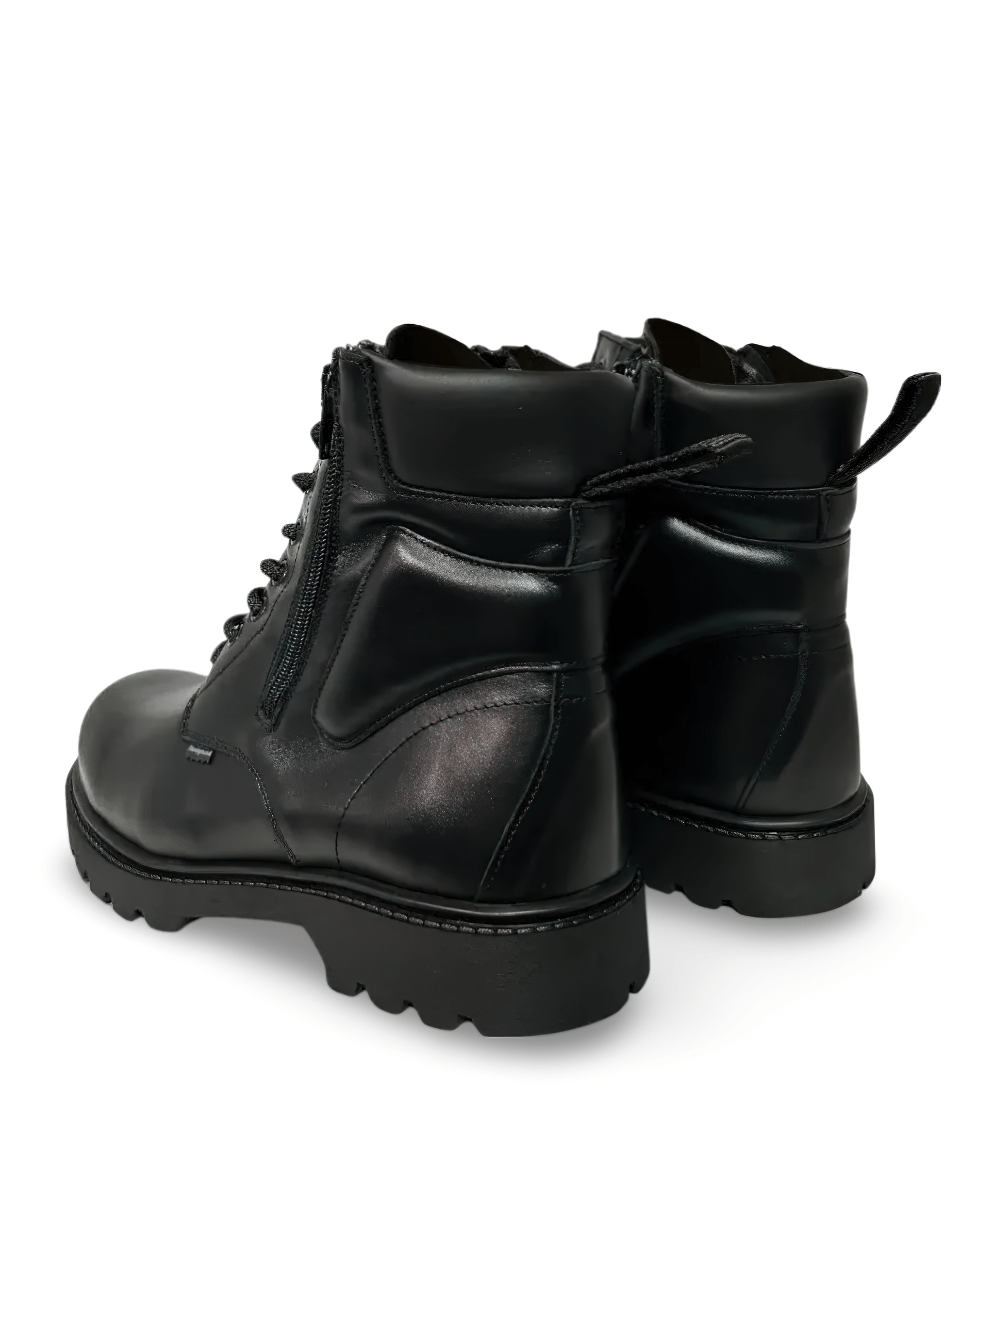 Black Leather Tactical Lace-Up Boots with Rubber Sole